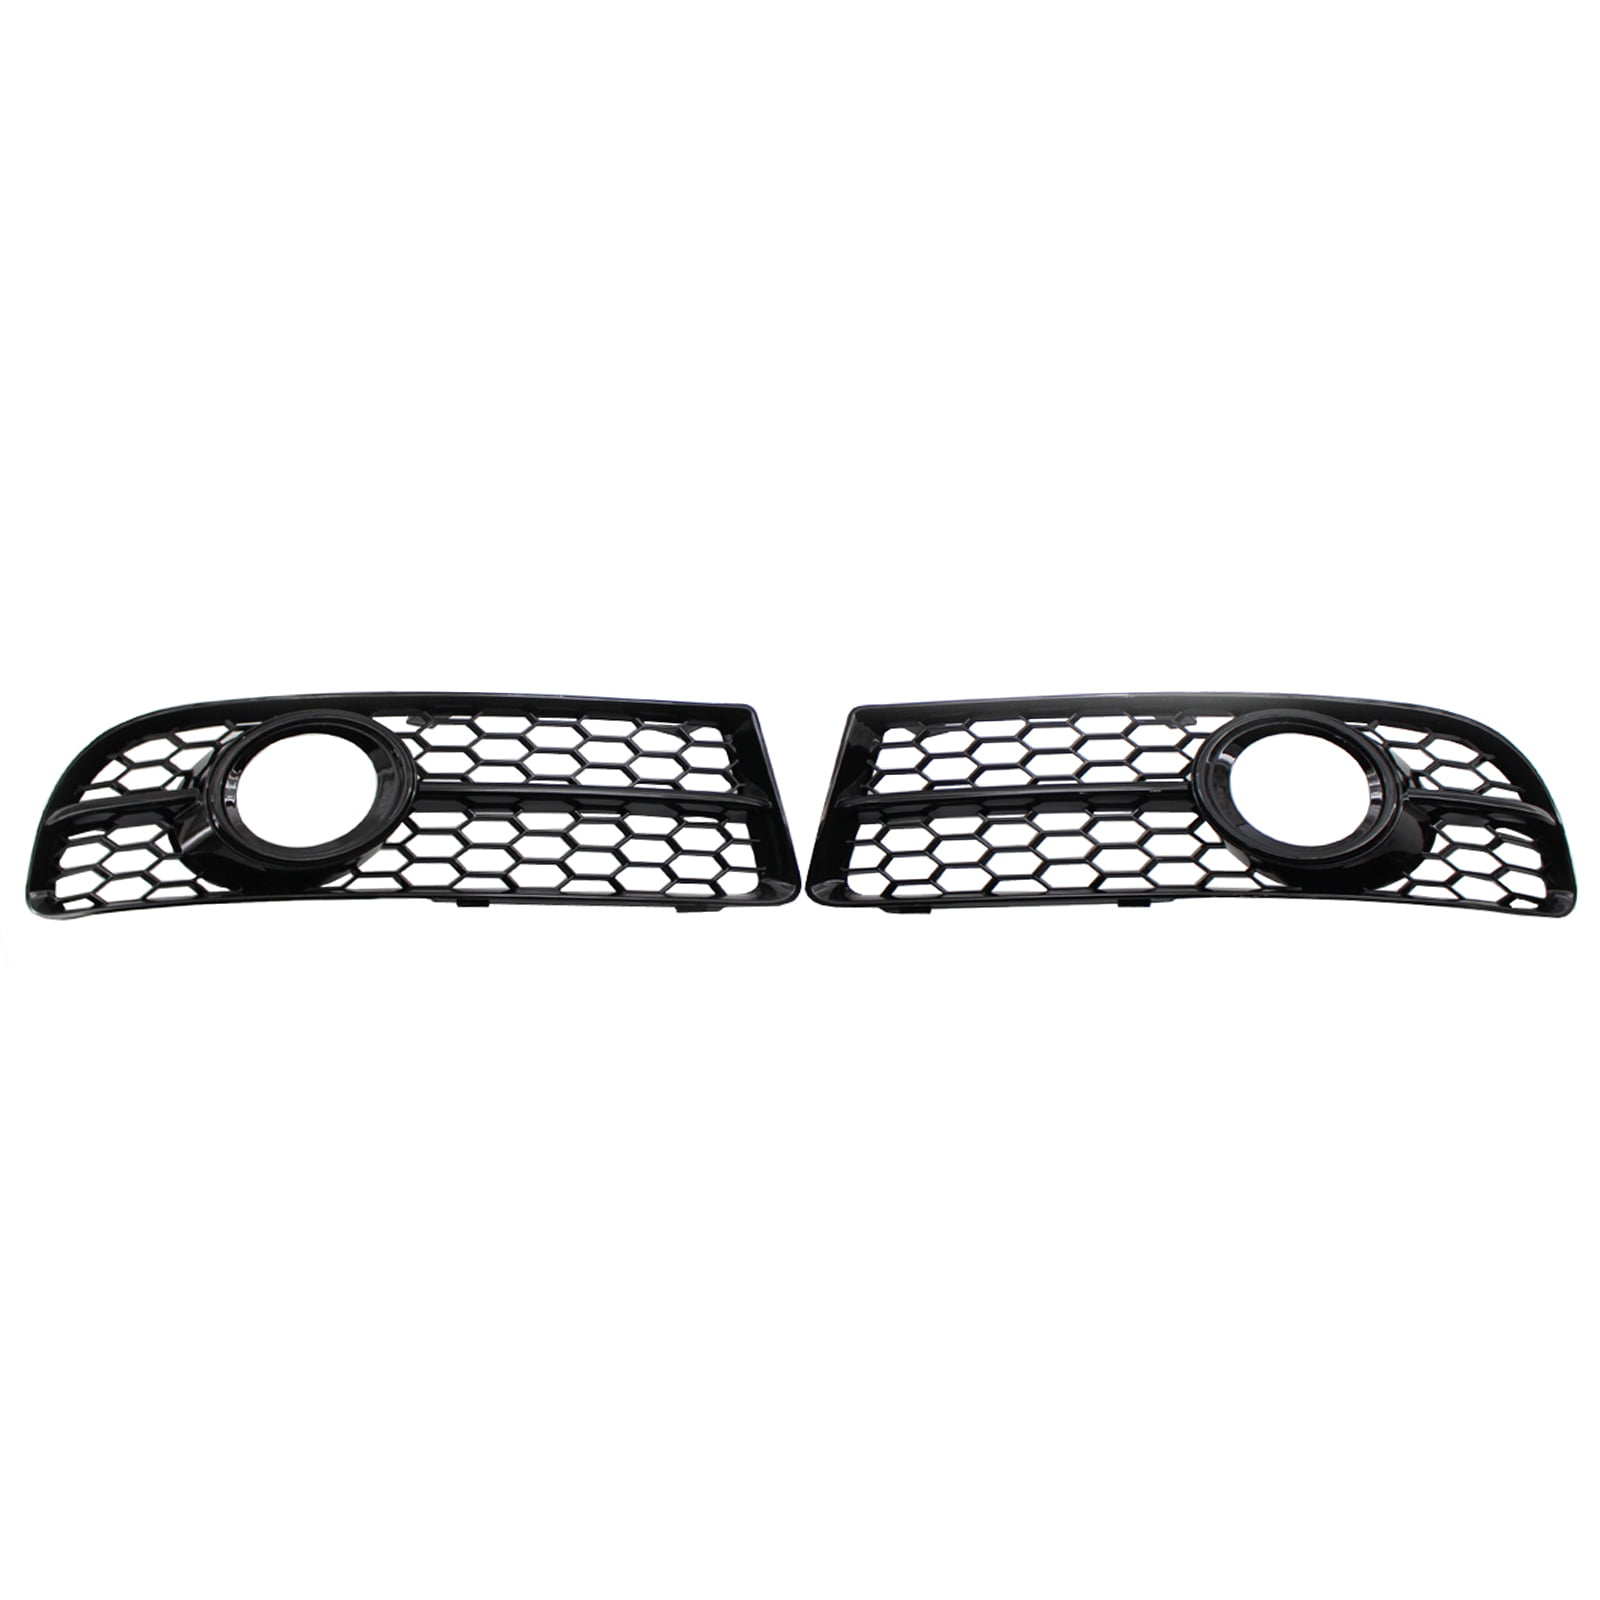 Front Right Side Grille Black Fog Lamp Cover Trim Fit For Audi Q5 S-Line 2013-16